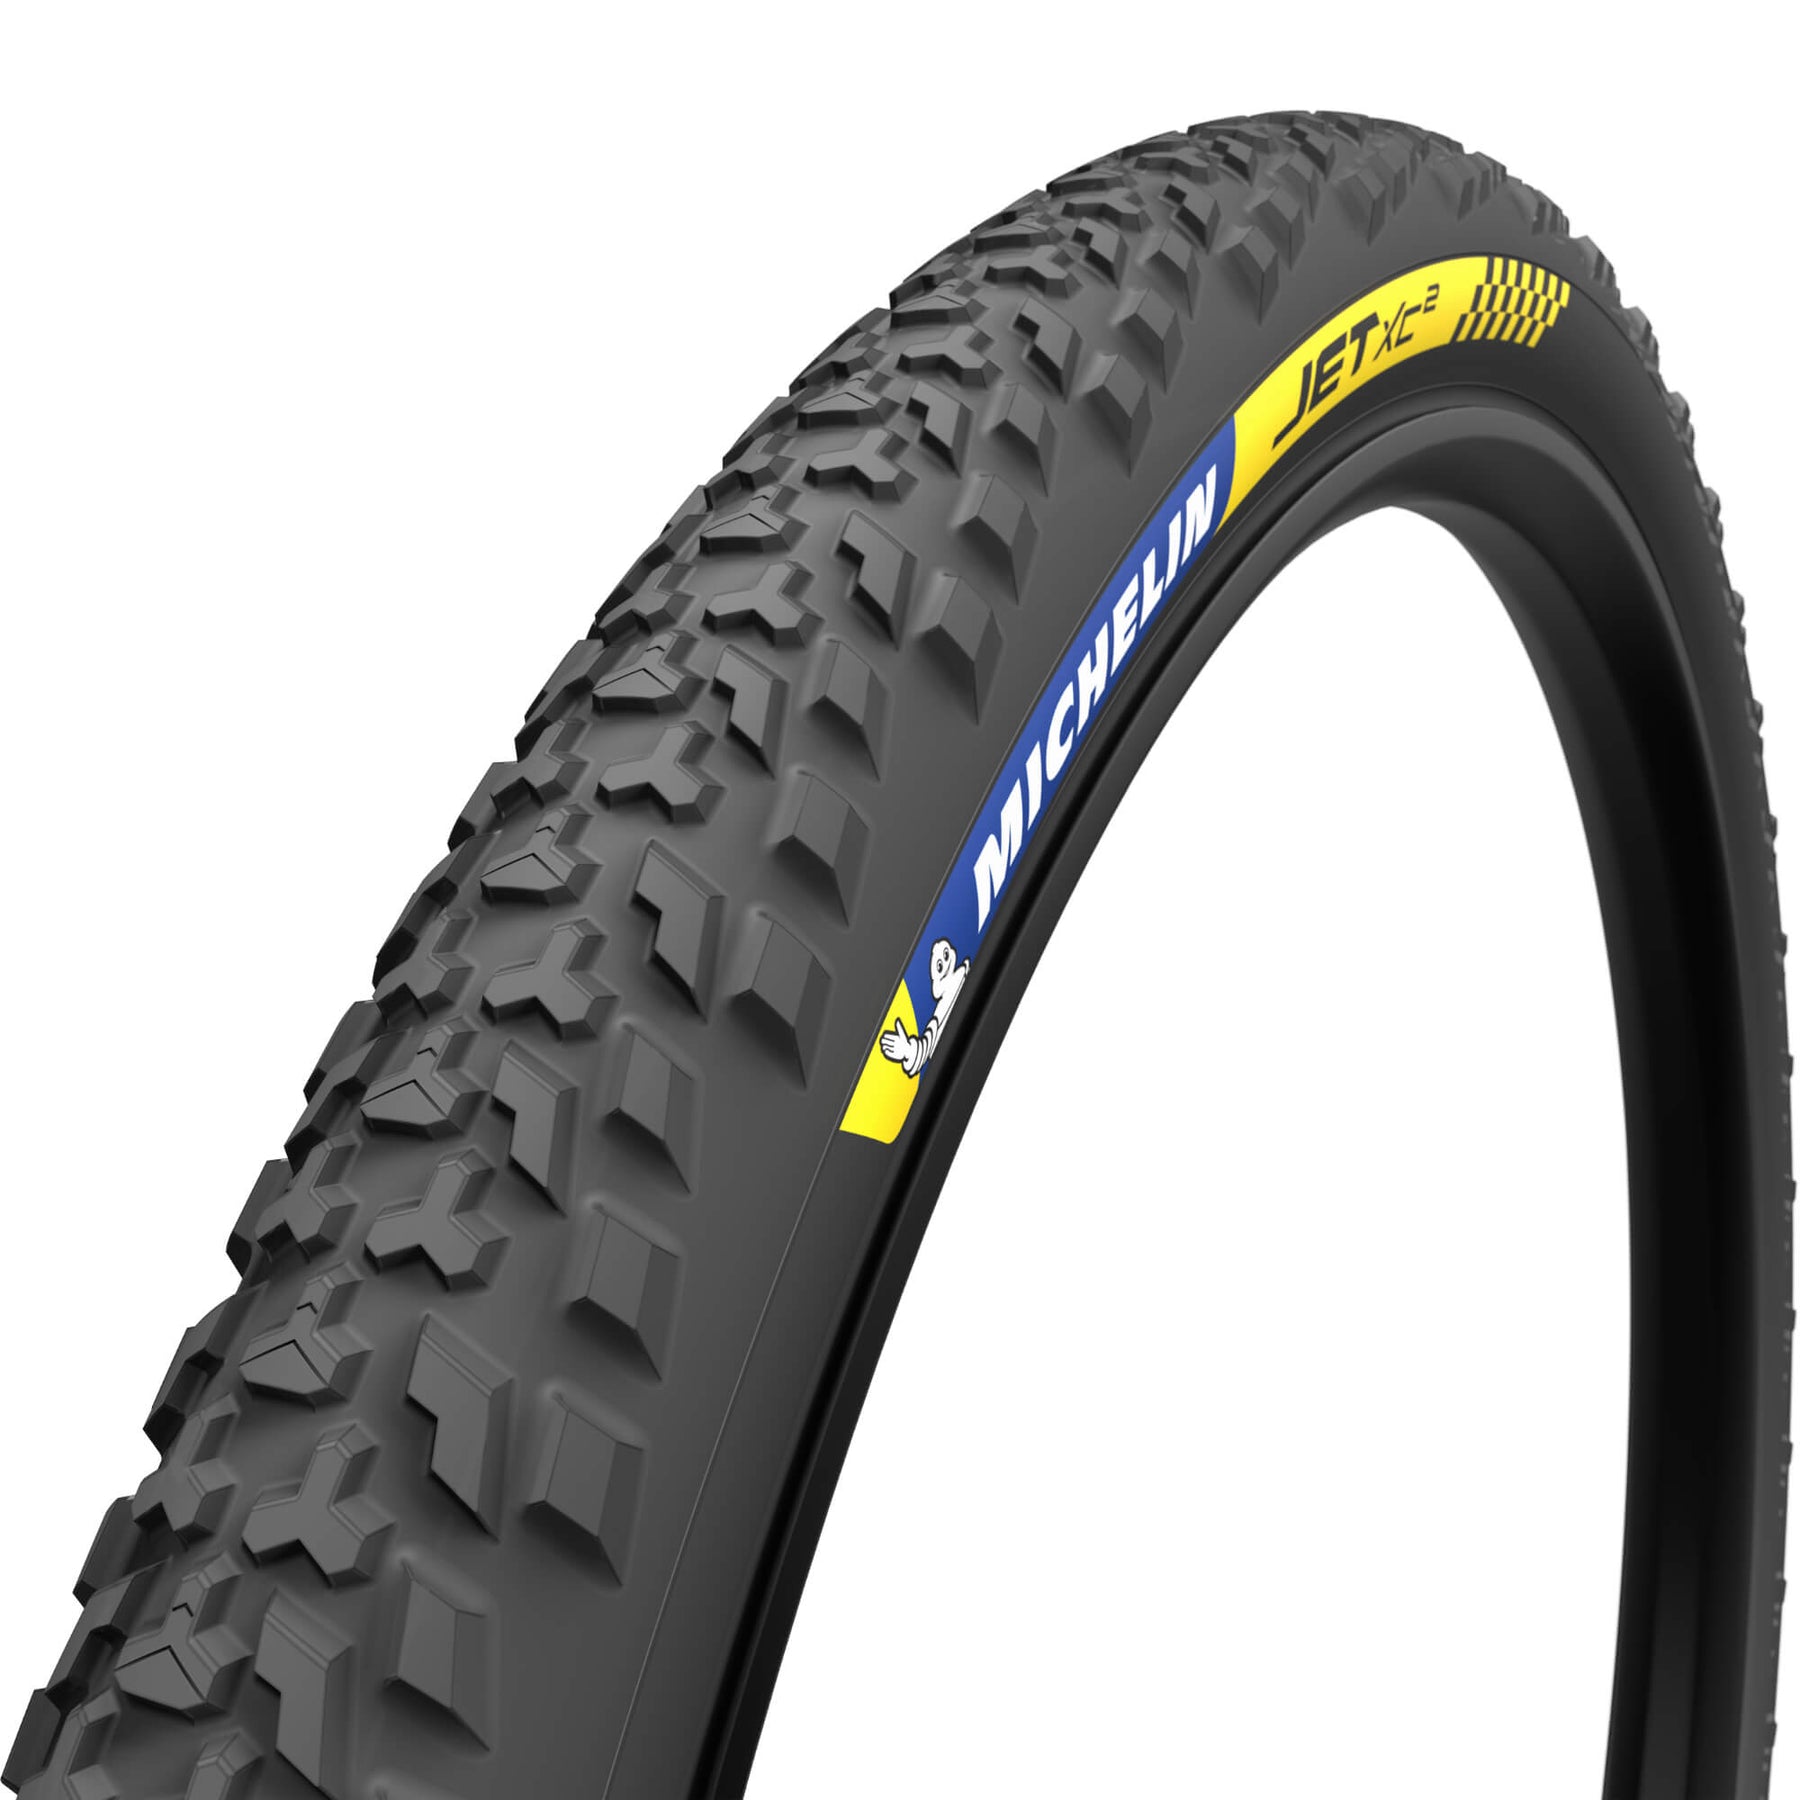 Michelin Jet XC2 Racing Line TLR MTB Tyre